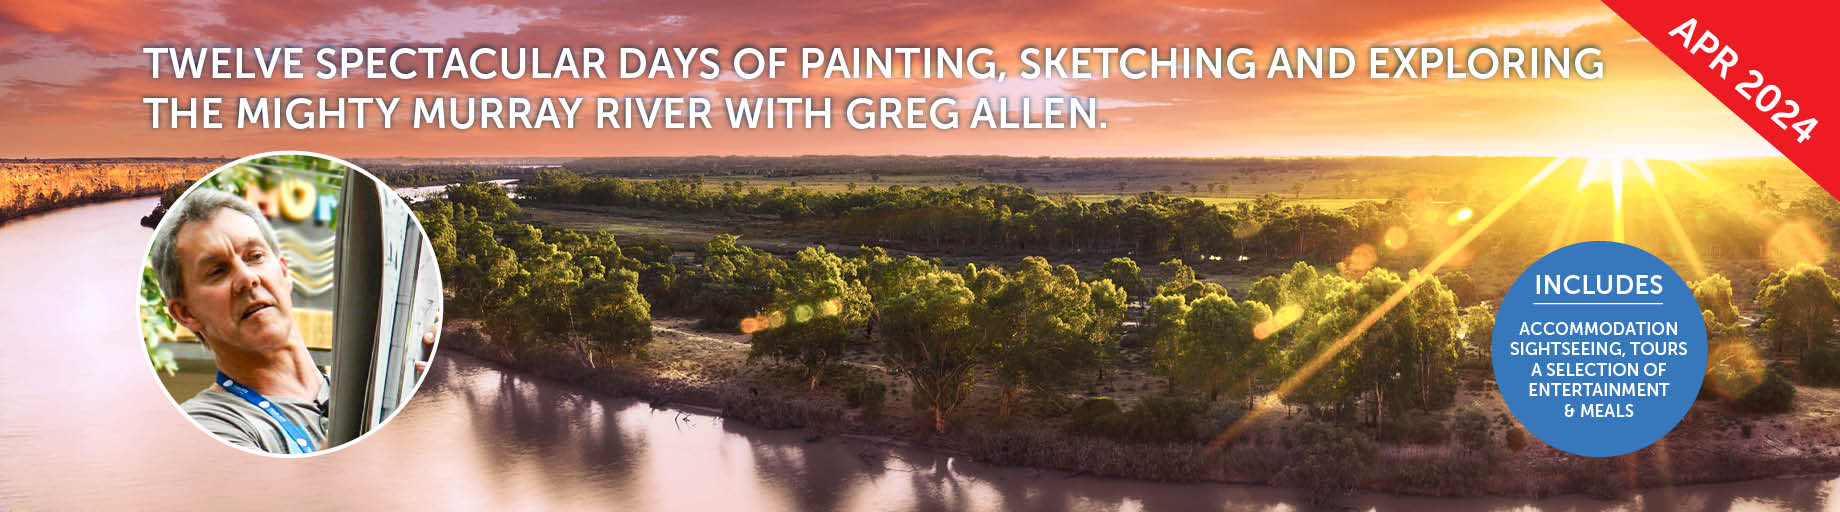 Victoria & The Murray River Painting Workshop with Greg Allen